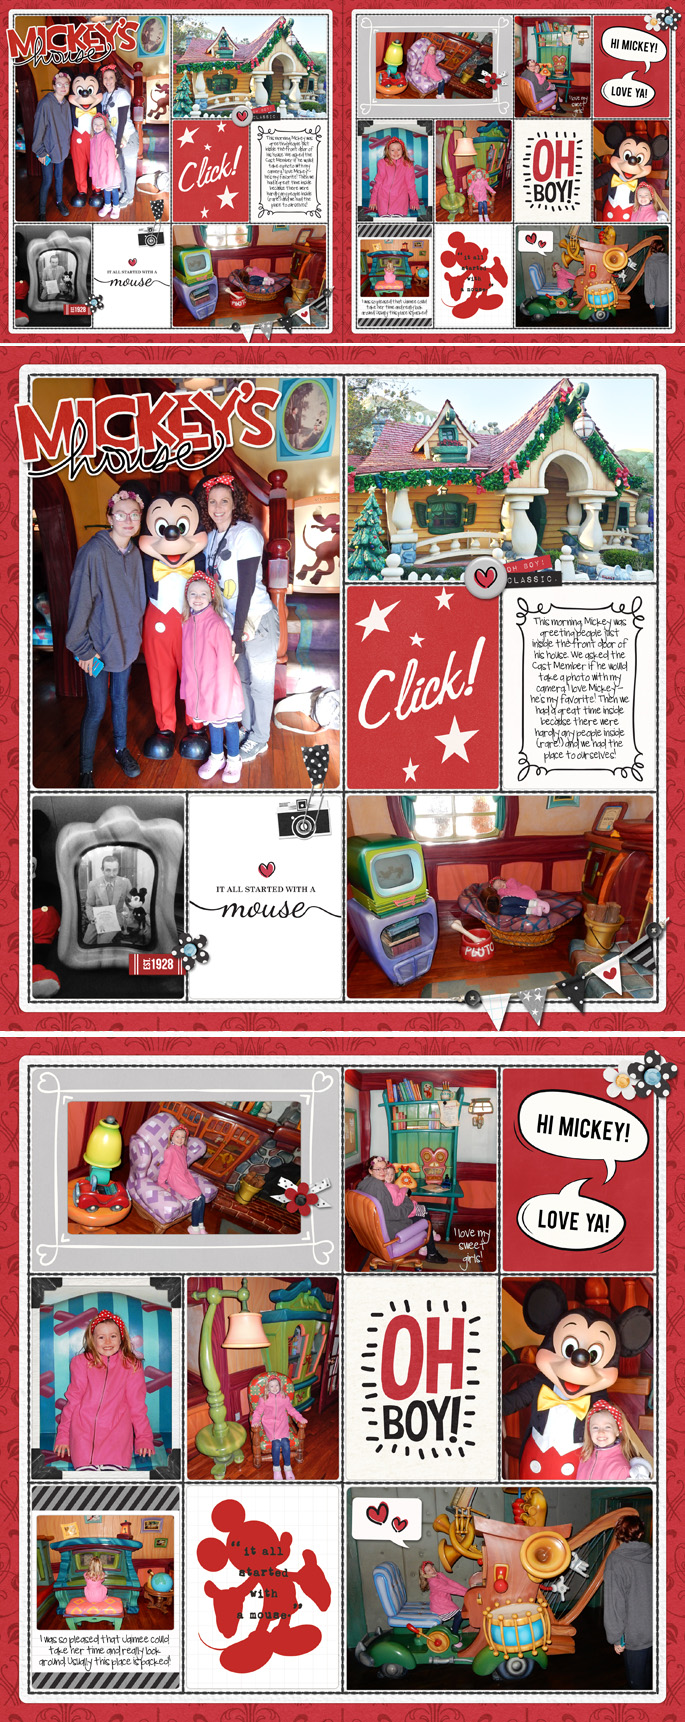 Mickey's House | A Disney Project Mouse Story - A Photo Book from Kathleen Summers - Sahlin Studio Project Mouse